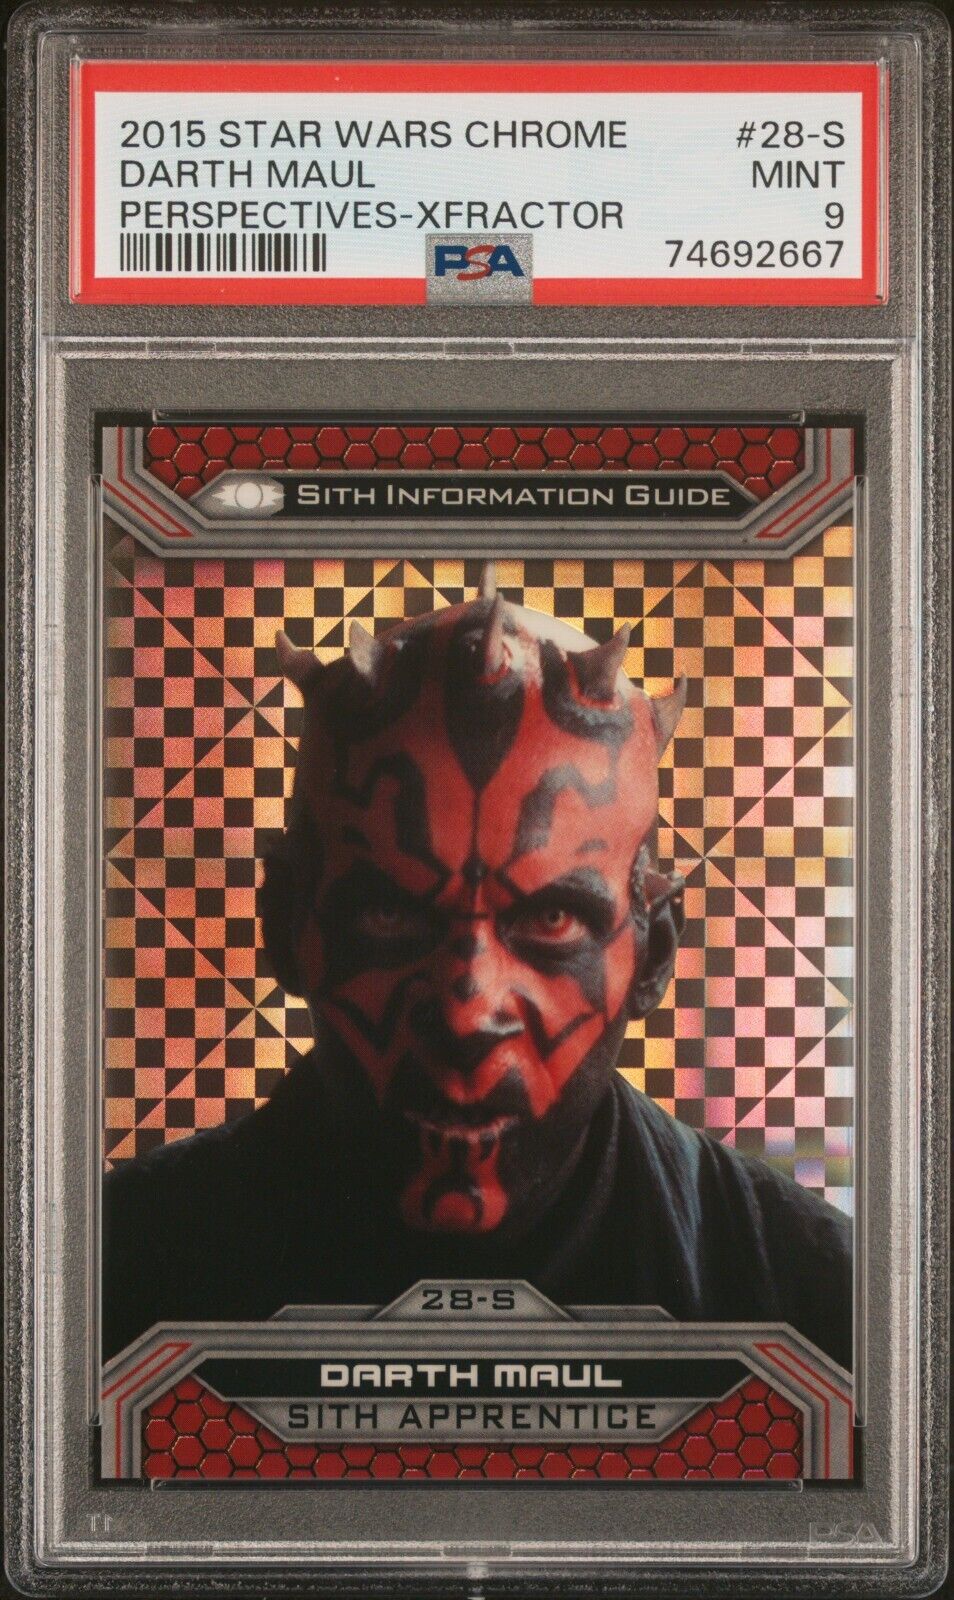 2015 TOPPS STAR WARS CHROME PERSPECTIVES DARTH MAUL XFRACTOR REFRACTOR /99 PSA 9